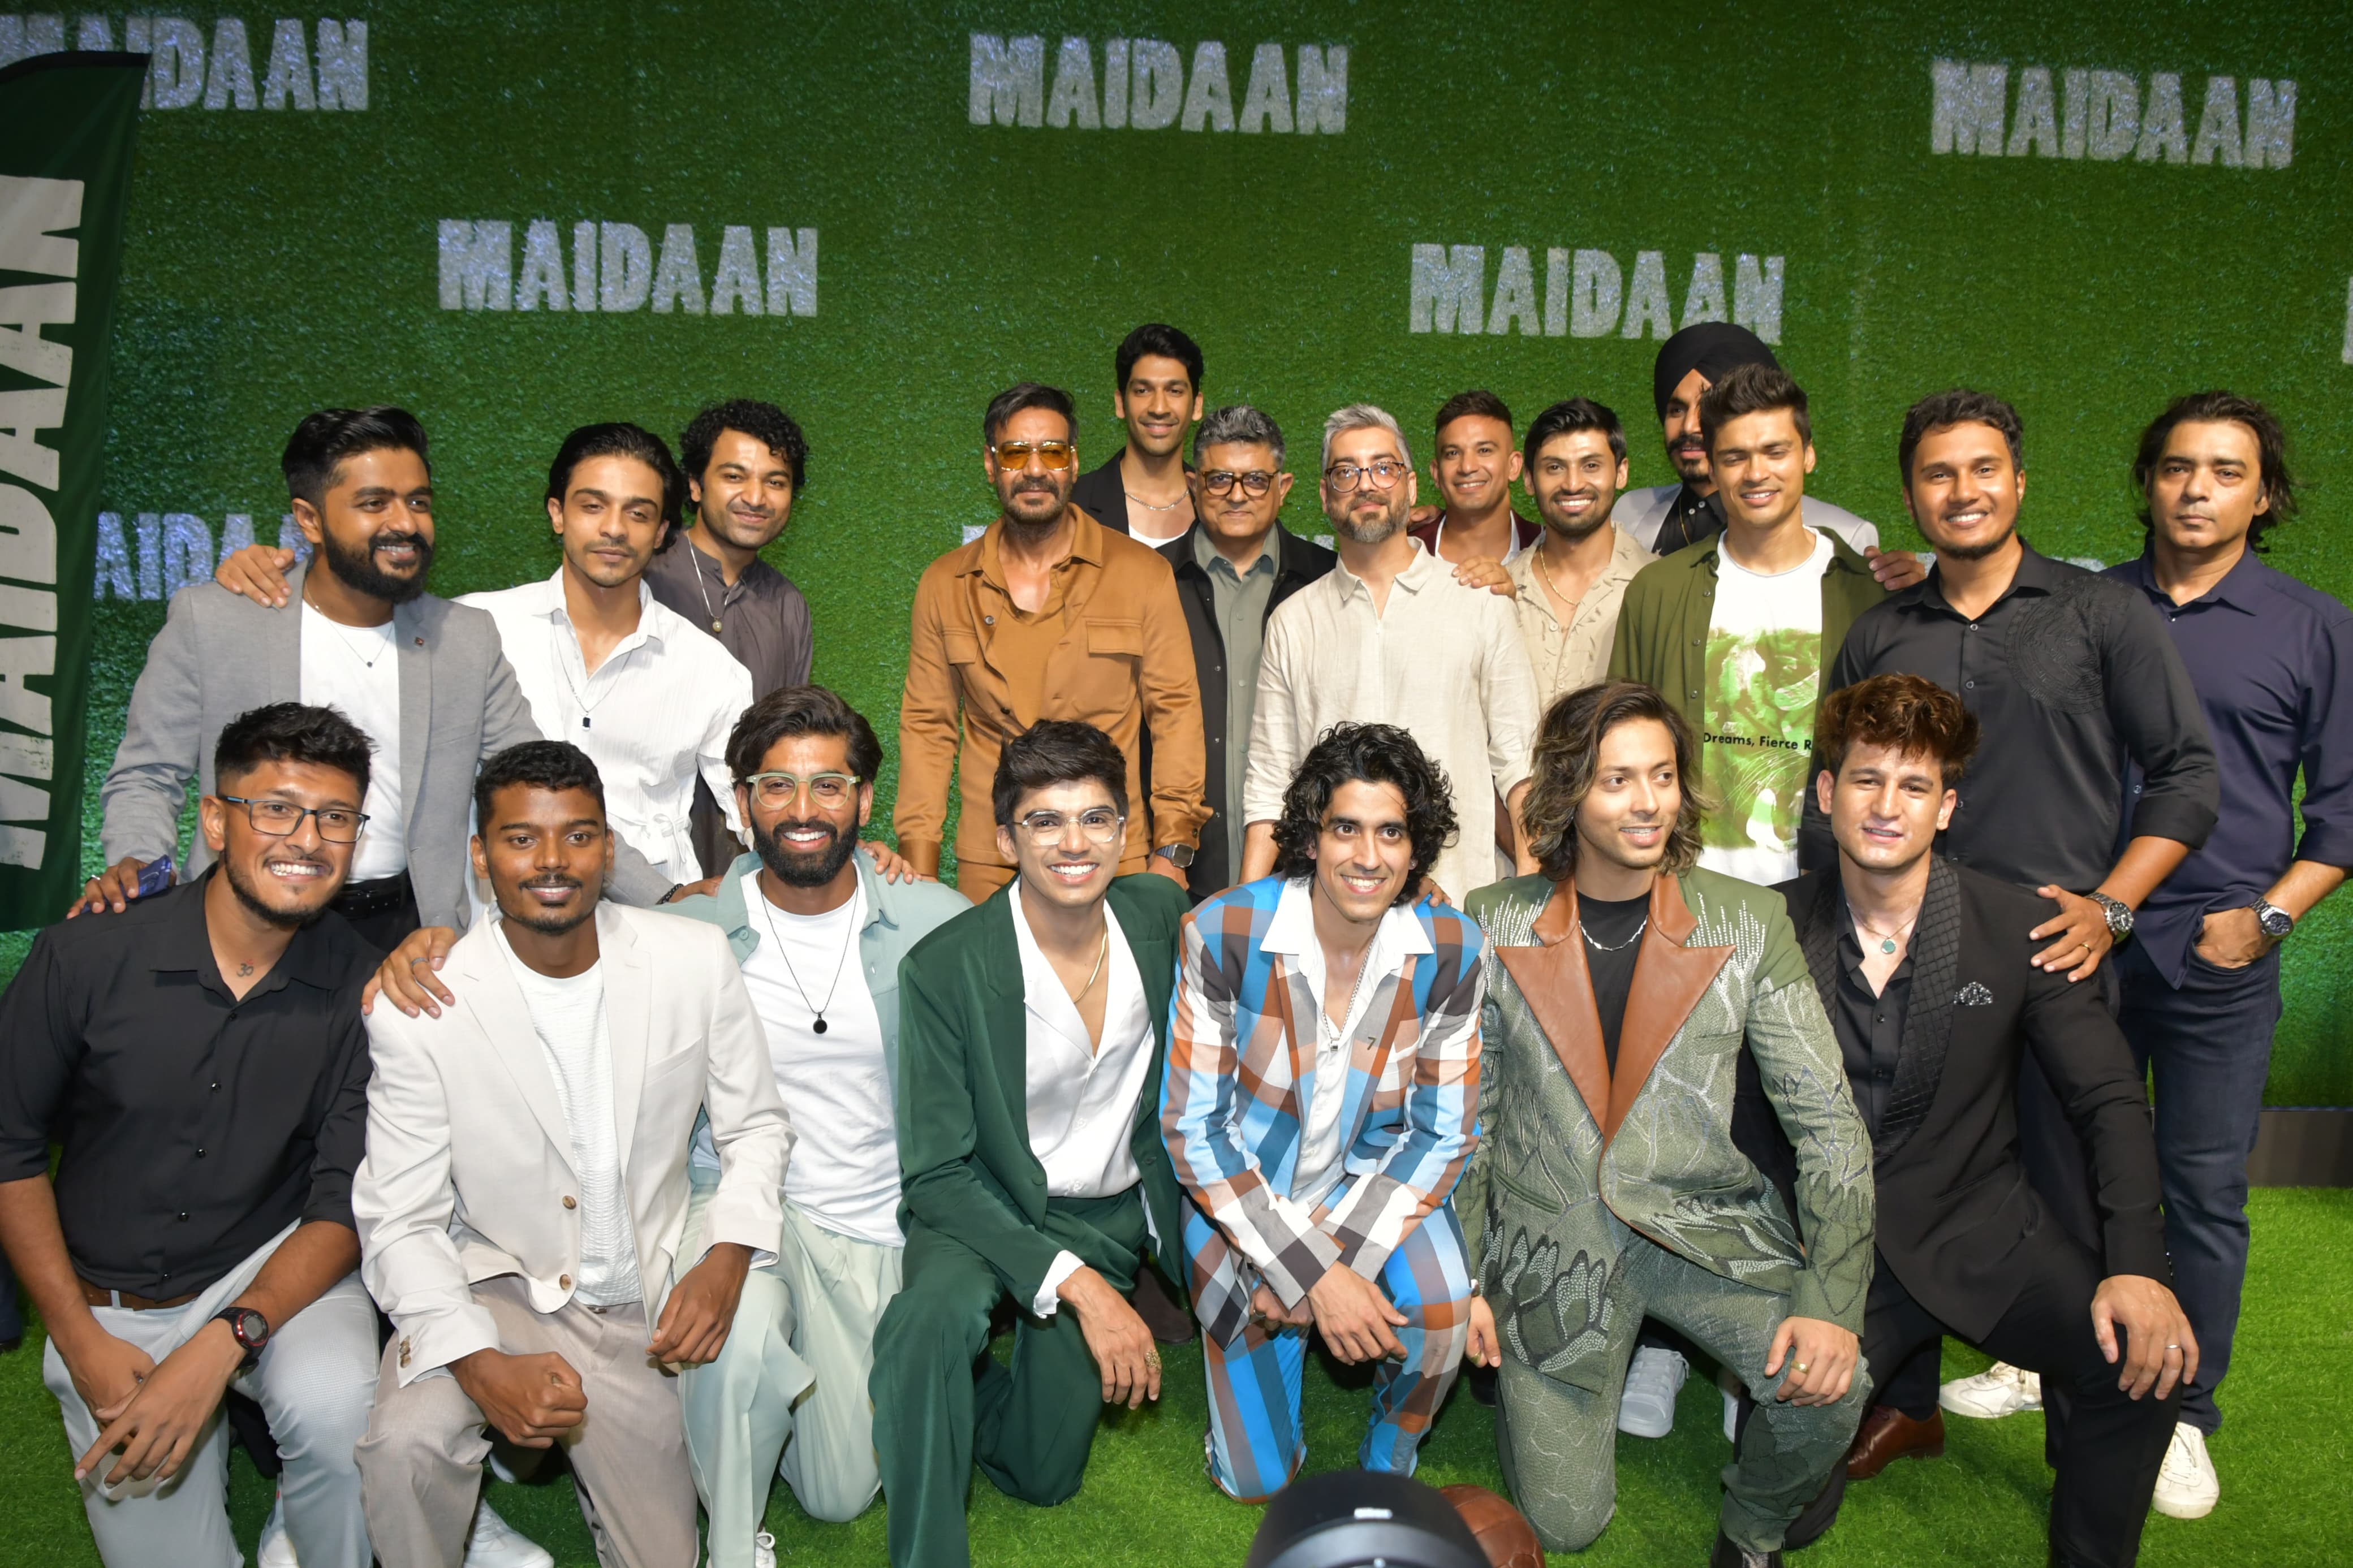 Ajay Devgn was snapped on the green carpet of the Maidaan screening as he posed with the entire cast of the team